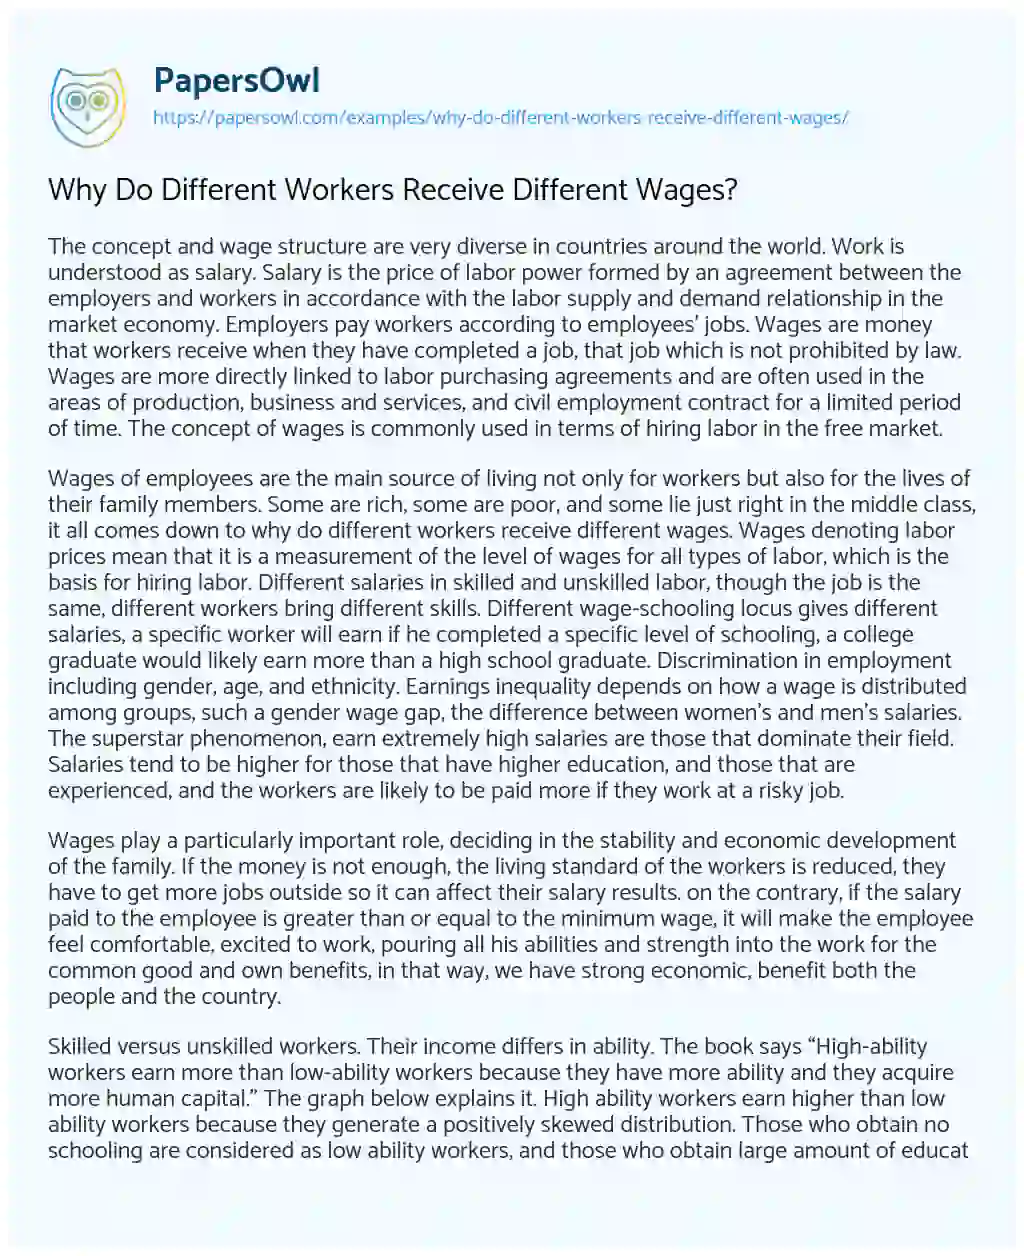 Essay on Why do Different Workers Receive Different Wages?